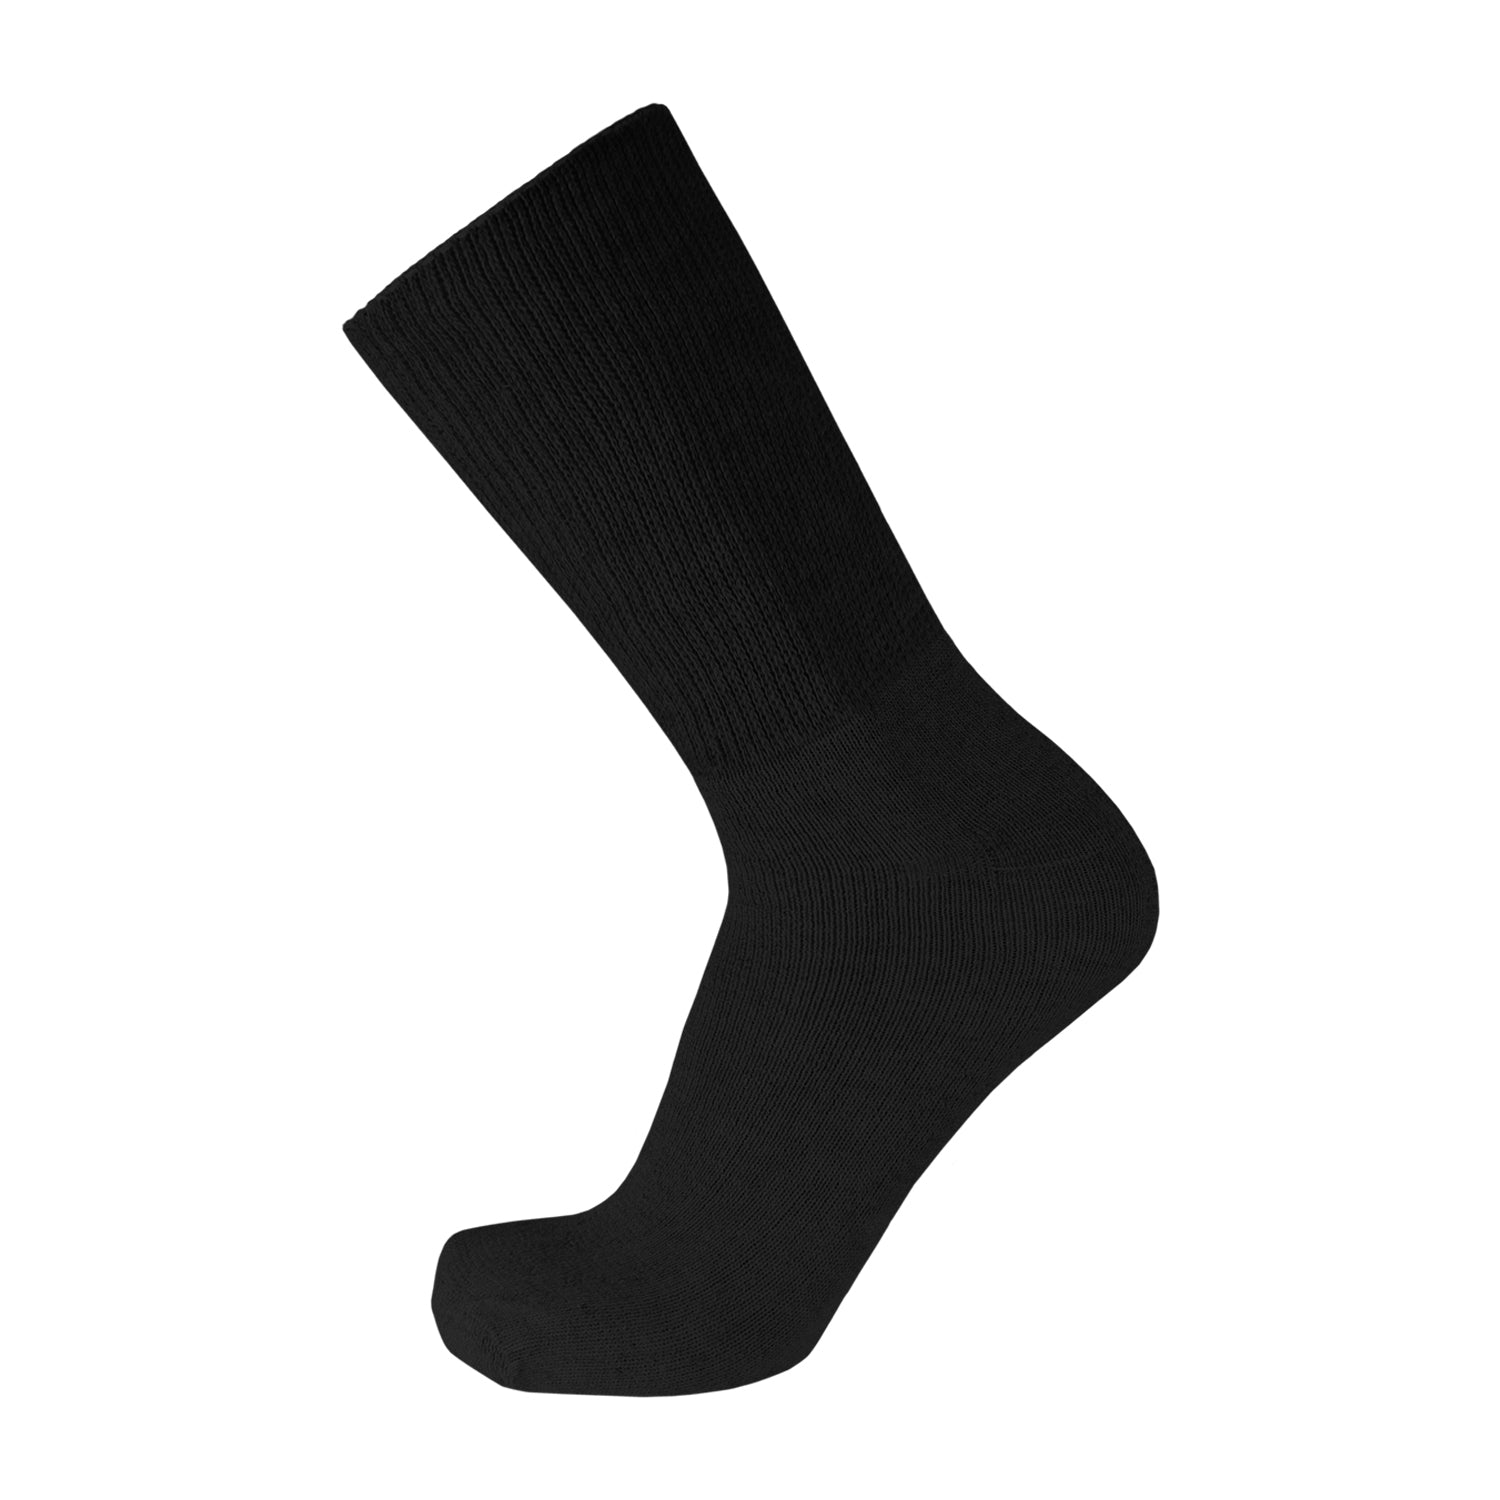 Black Crew Socks Cotton Soft With Wide Nonbinding Top